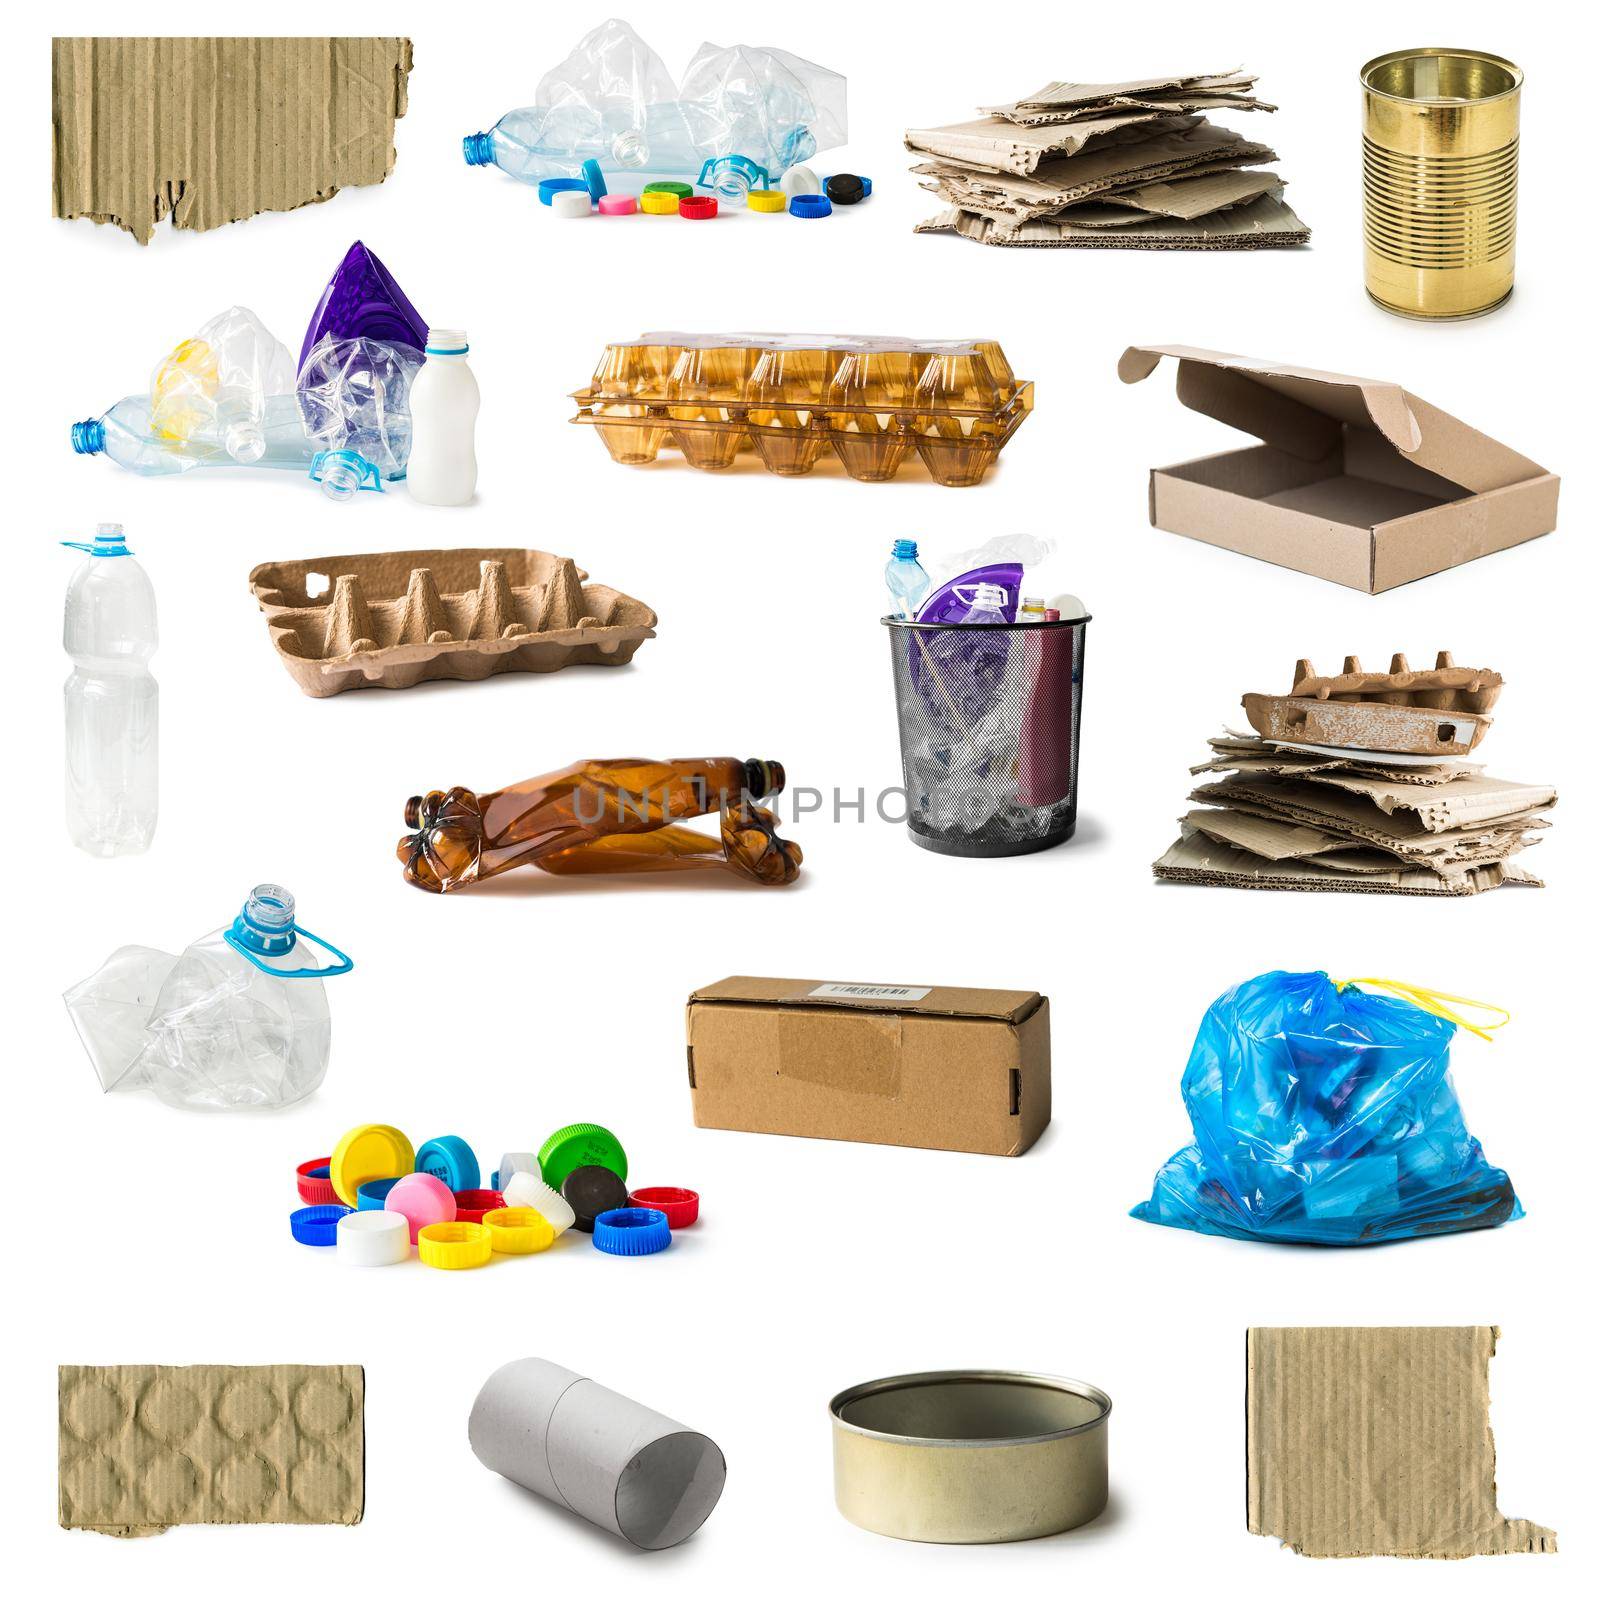 collage of plastic and carton rubbish by tan4ikk1